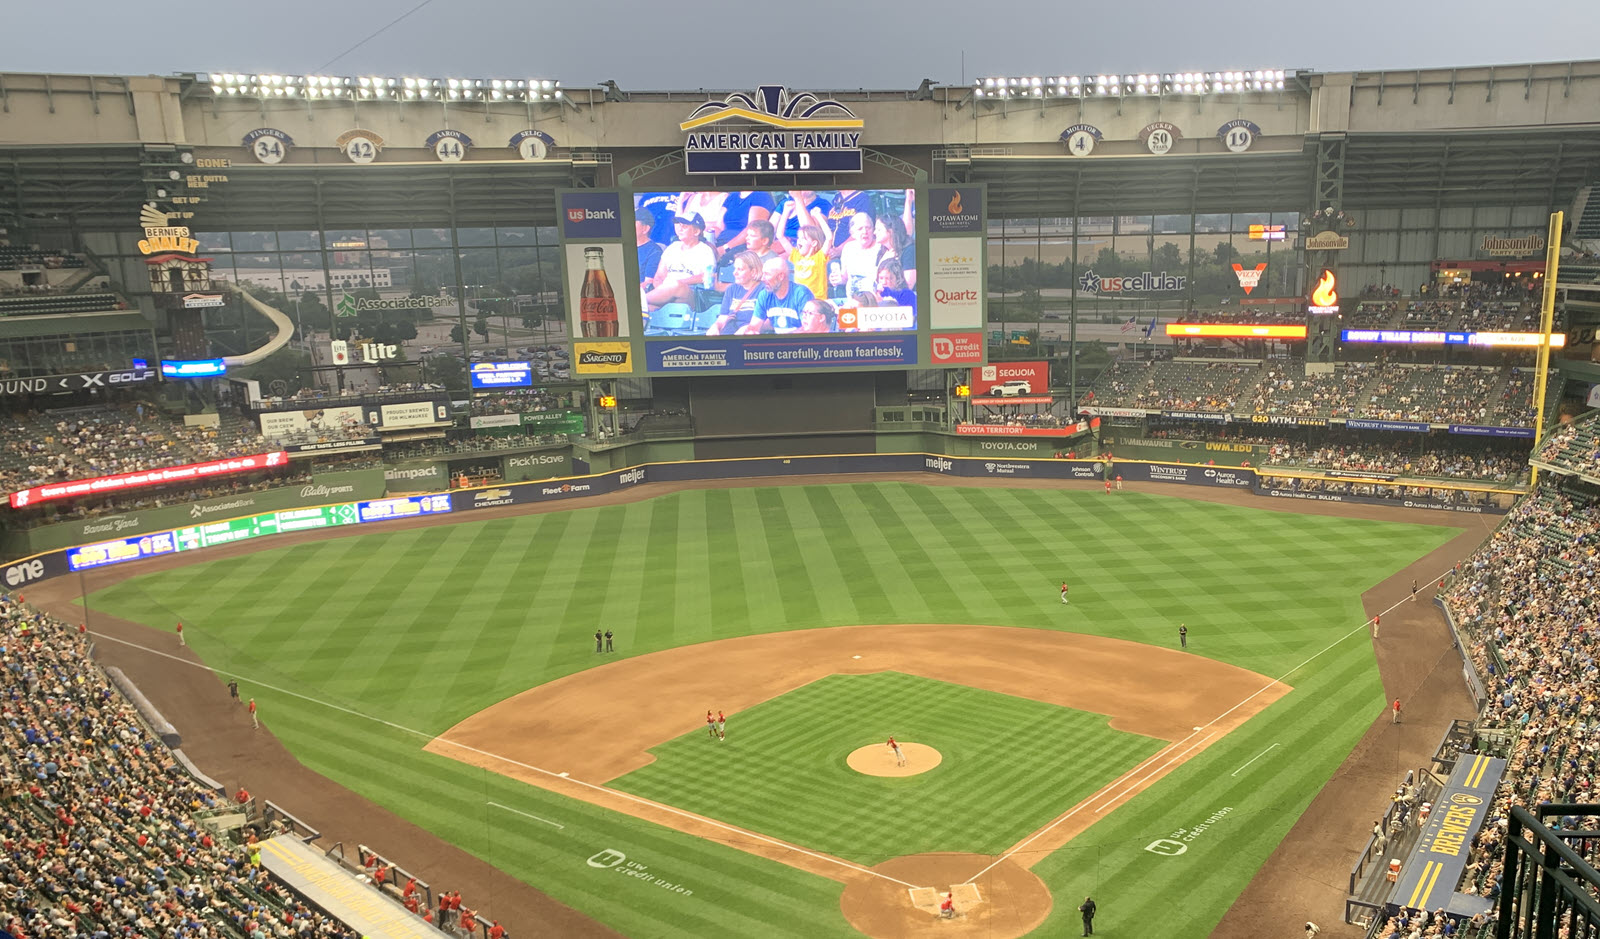 Image of the Milwaukee Brewers Stadium from inside on the top deck looking down on the field